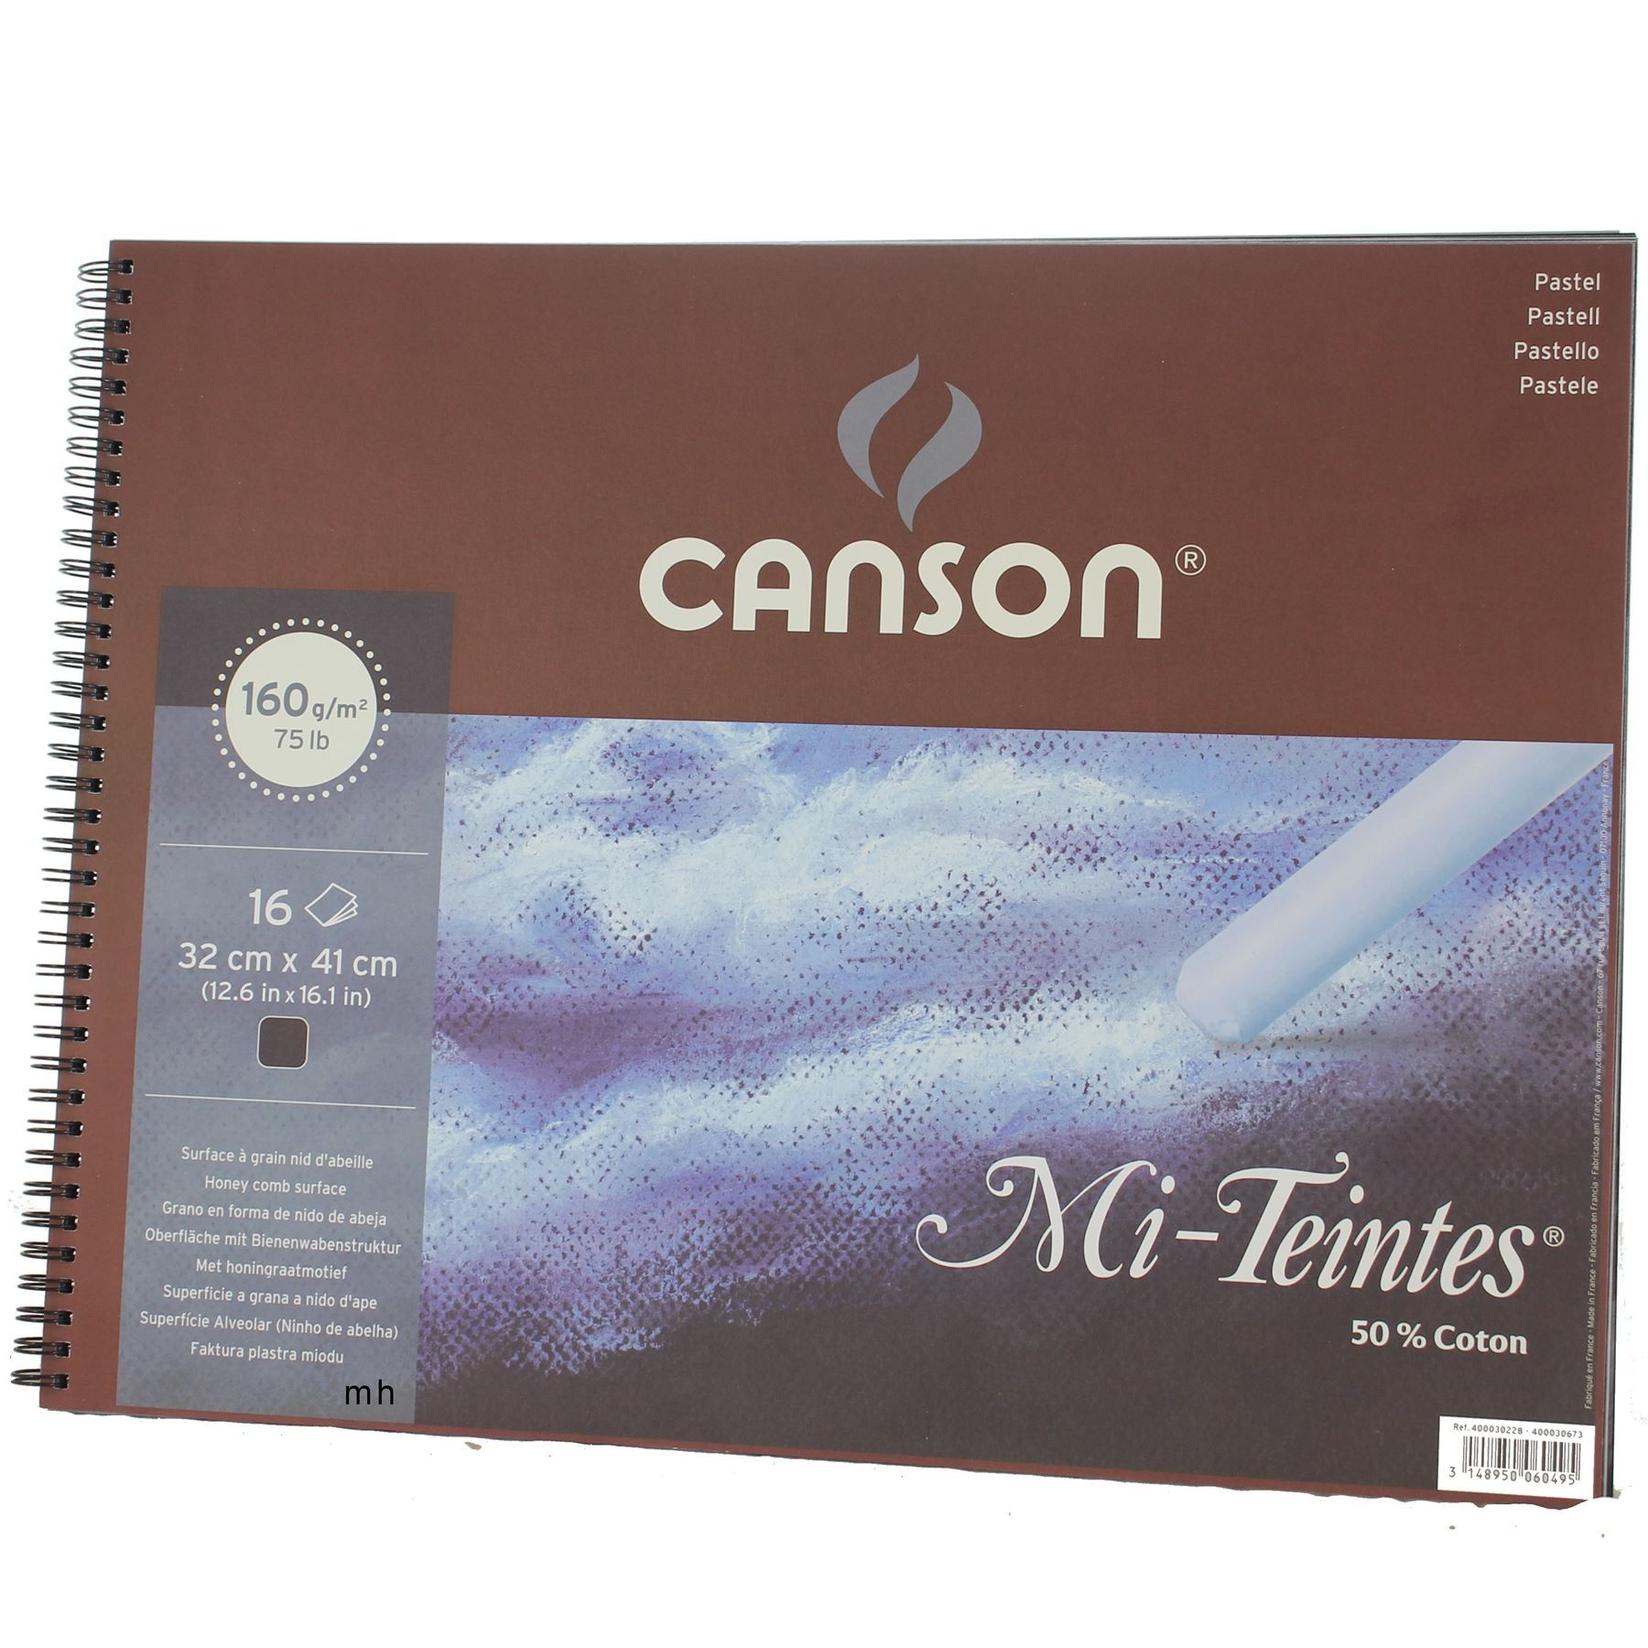 Selected image for CANSON Blok 32x41cm 160g Mi-teintes 400030228